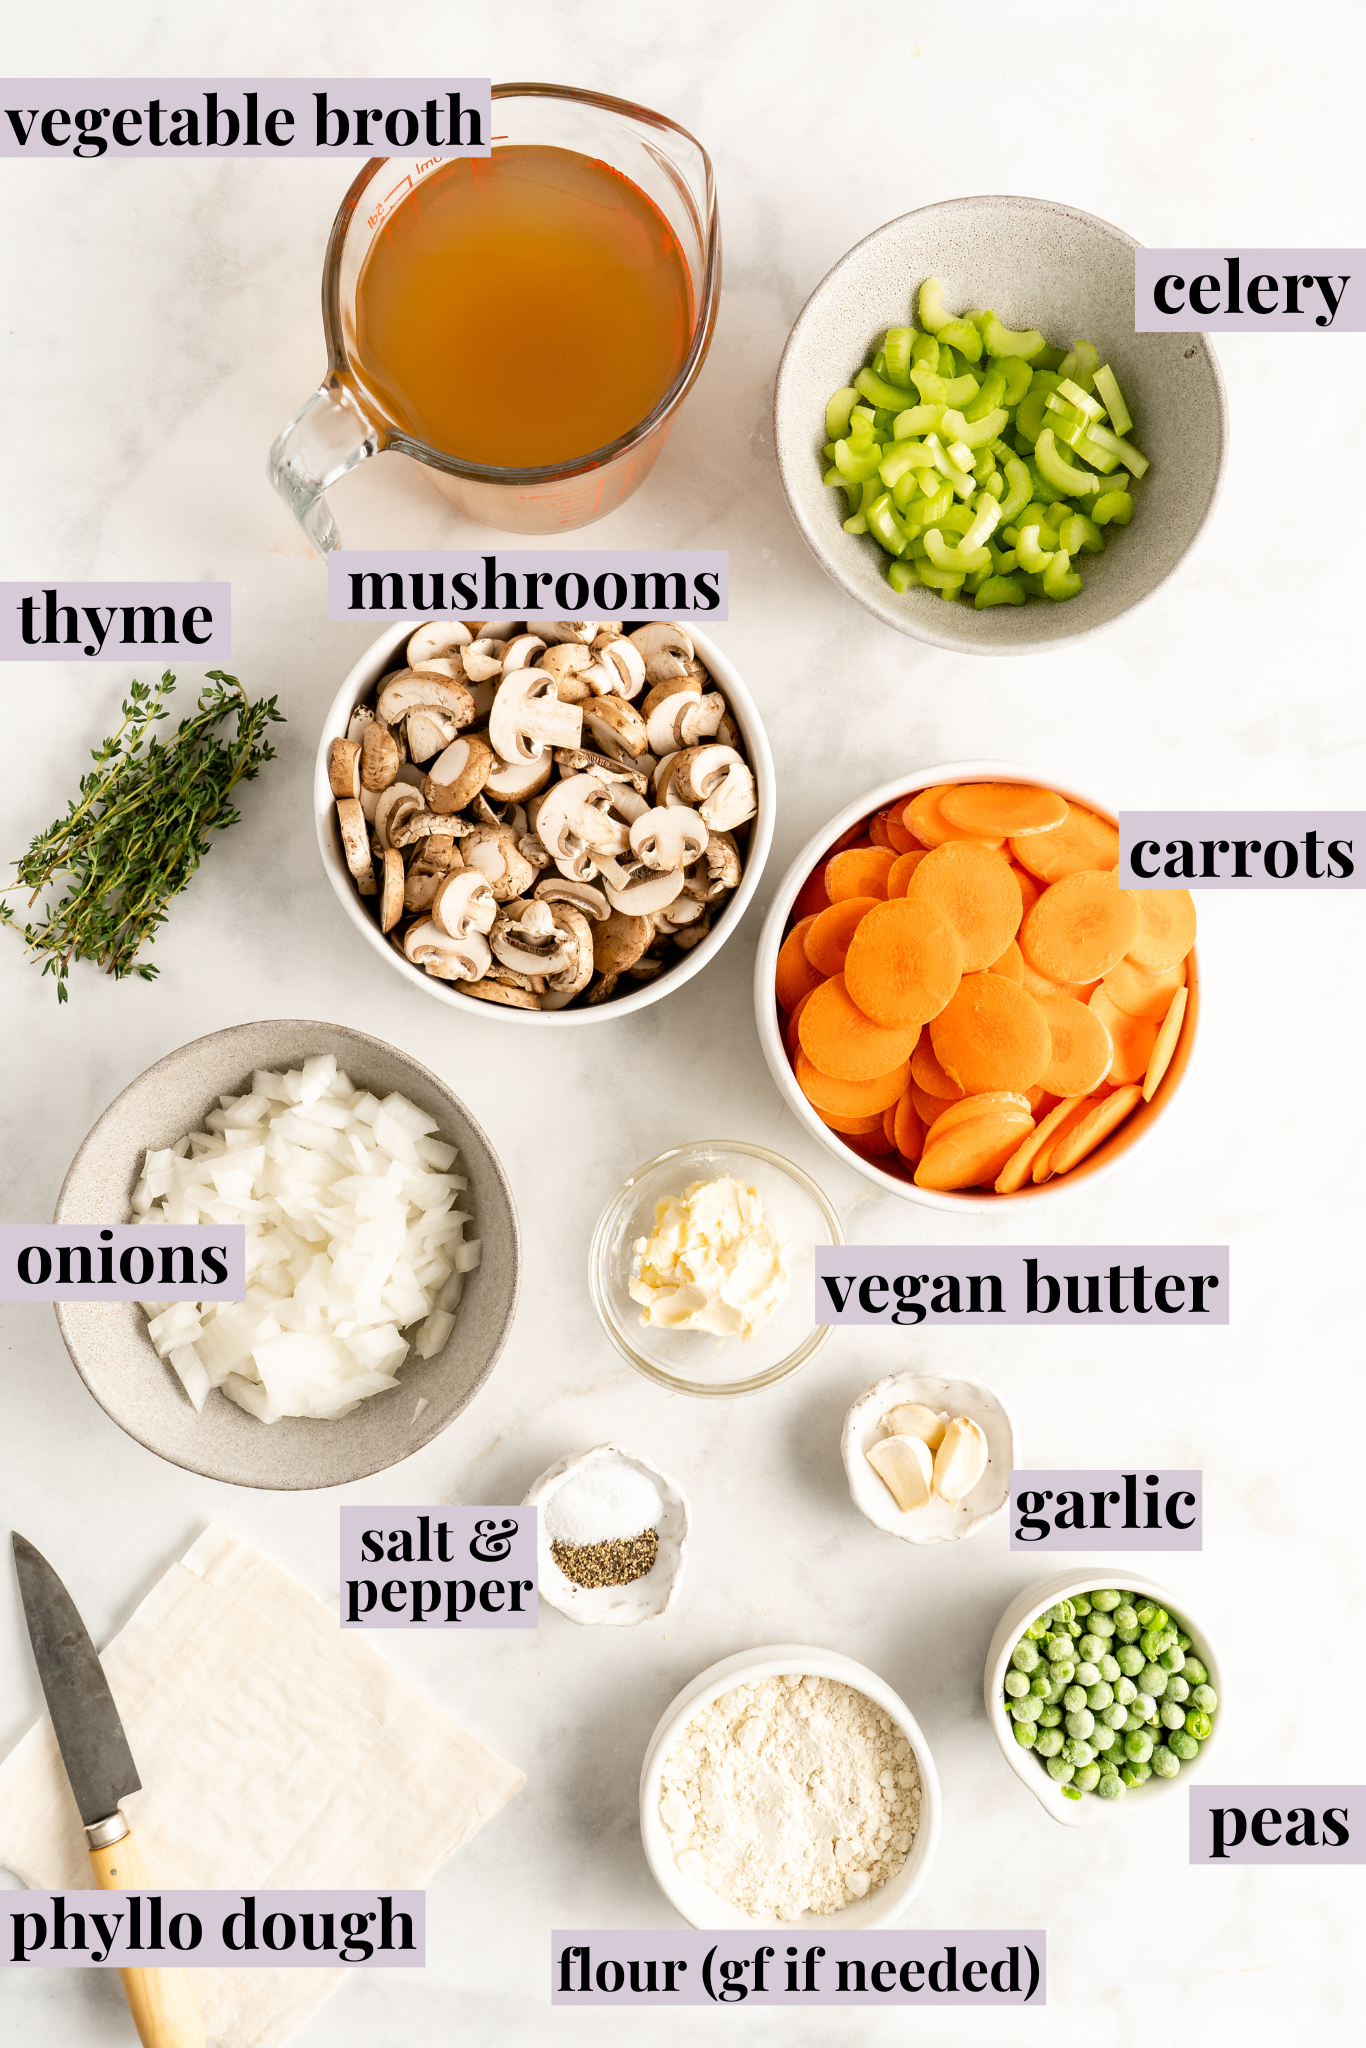 Overhead view of the labeled ingredients for vegan pot pie: a pyrex of vegetable broth, a bowl of celery, a bowl of mushrooms, a bowl of carrots, sprigs of thyme, a bowl of onions, a bowl of salt and pepper, a bowl of garlic, a bowl of vegan butter, a bowl of peas, a bowl of flour, and a sheet of phyllo dough, with a knife on it